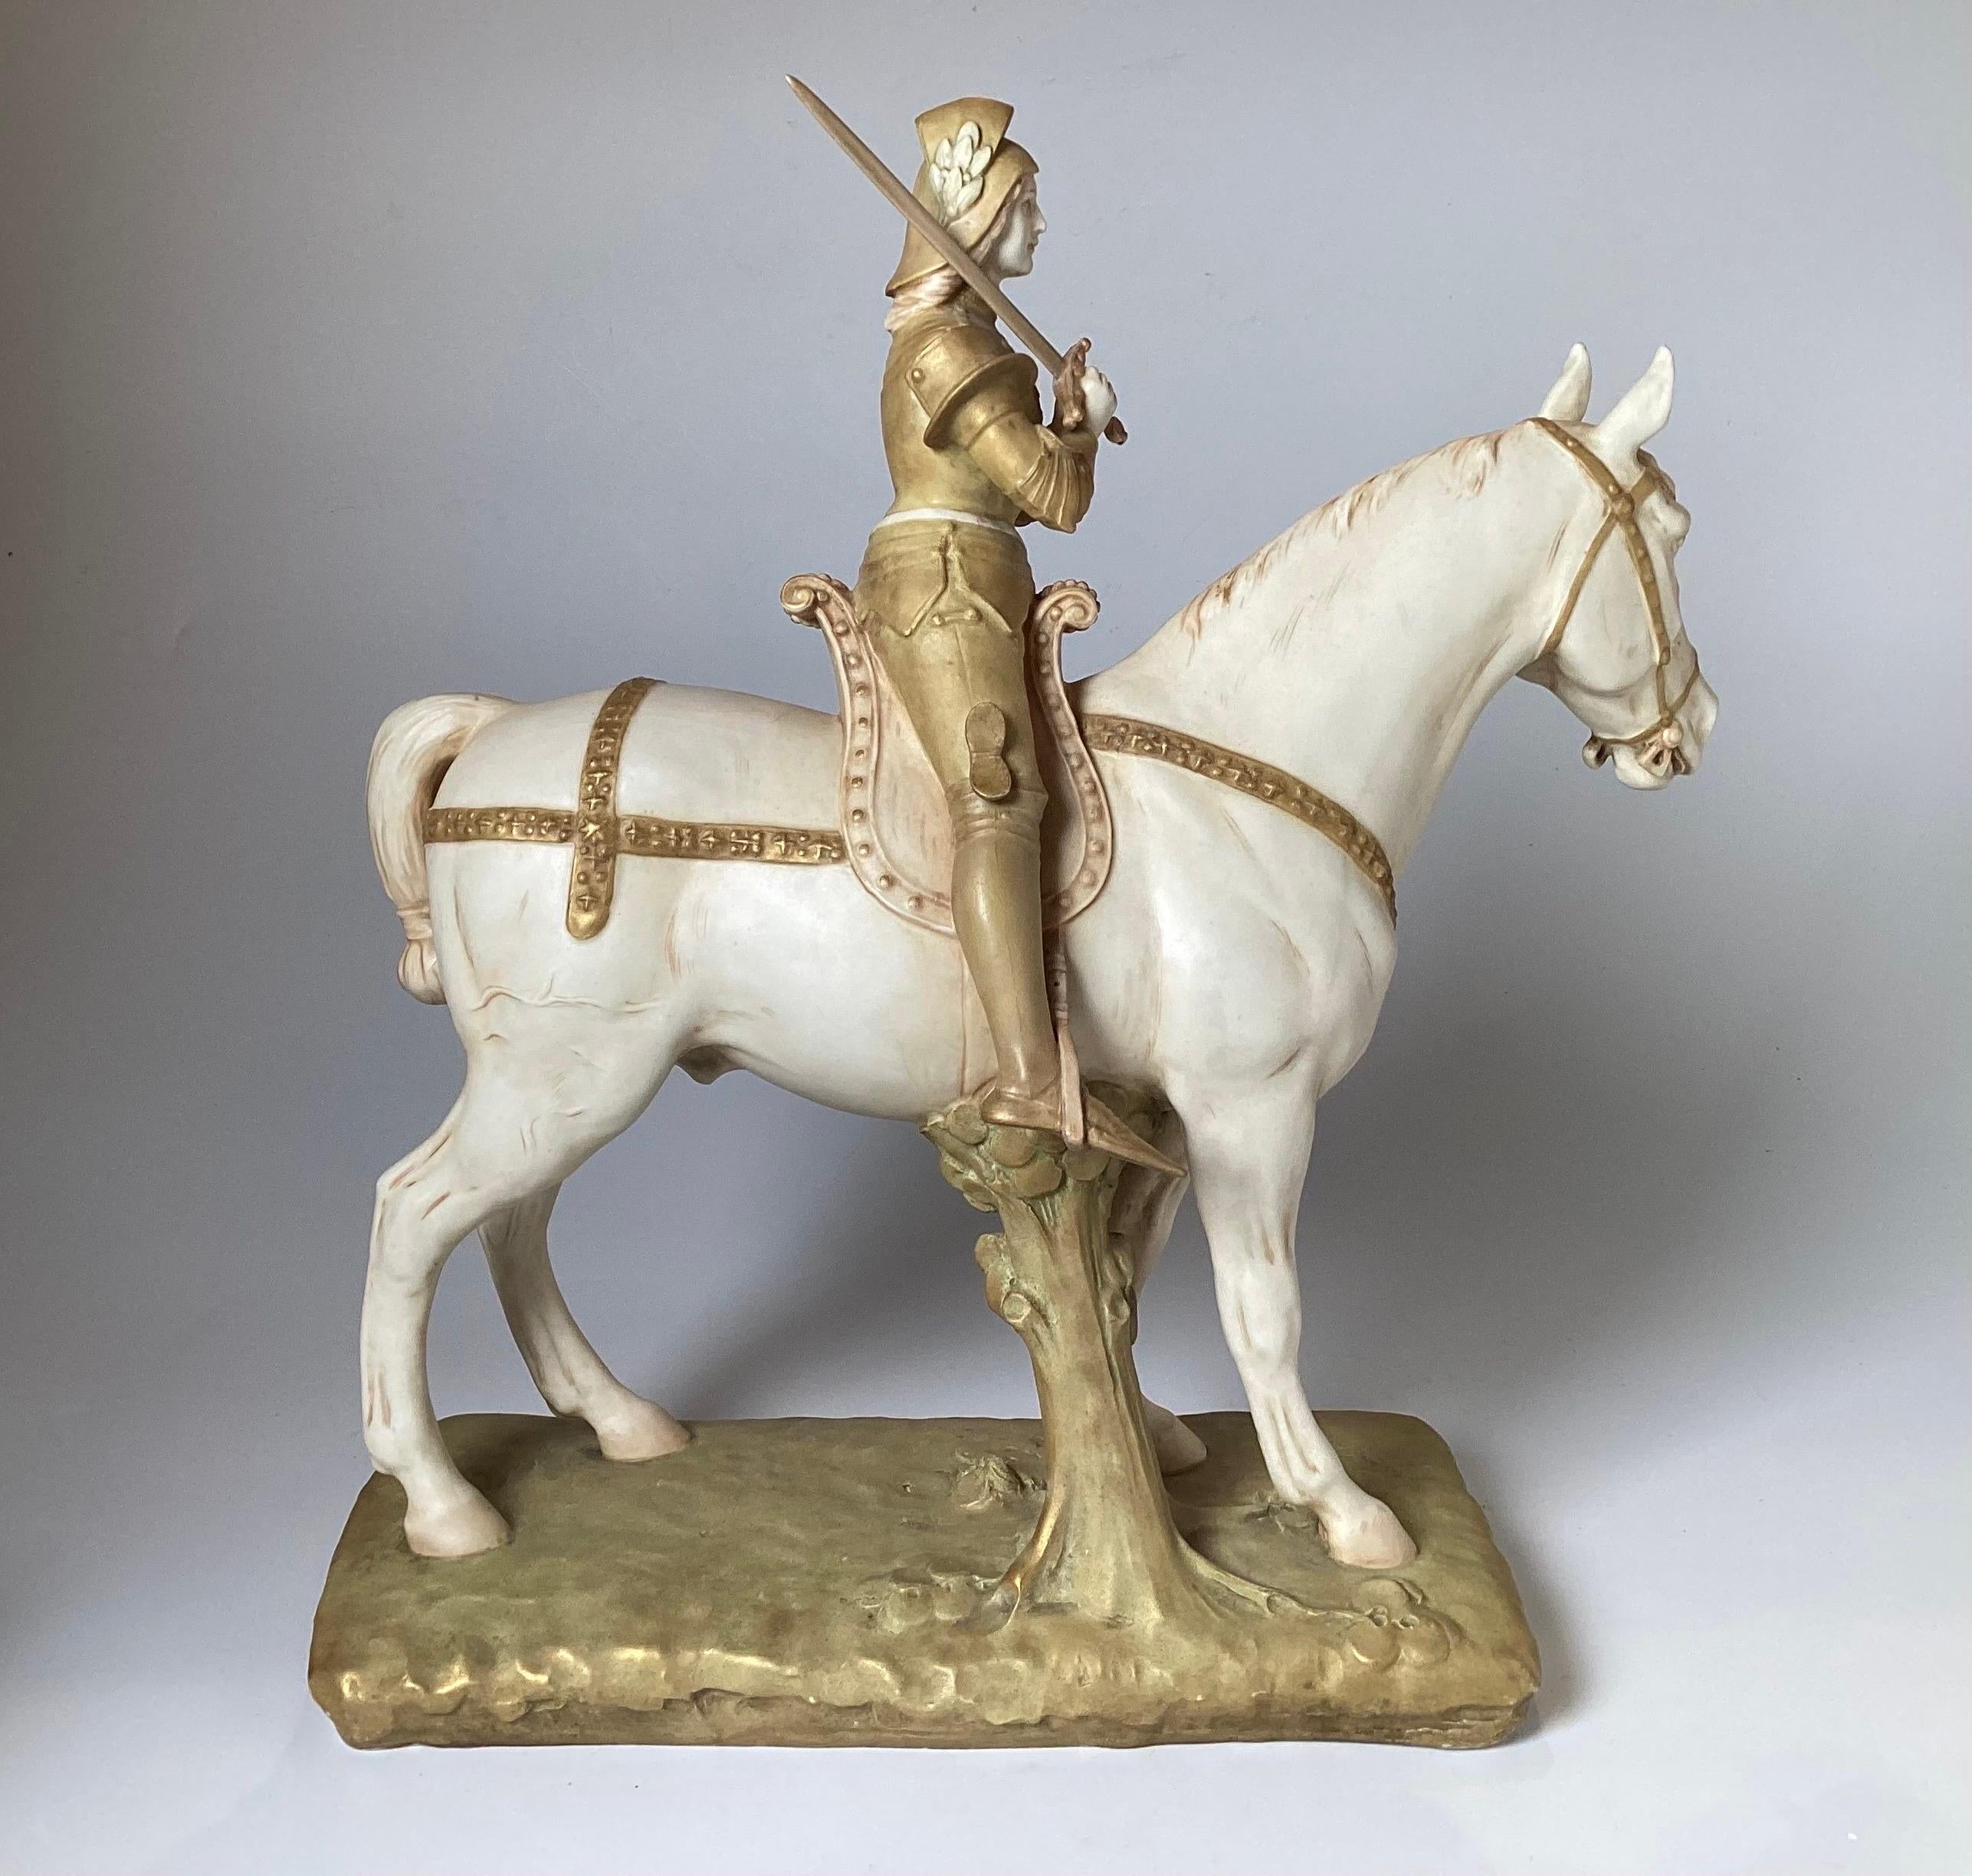 Hand-Painted Unique Hand Painted Porcelain Figure of Joan of Arc Riding a Horse For Sale